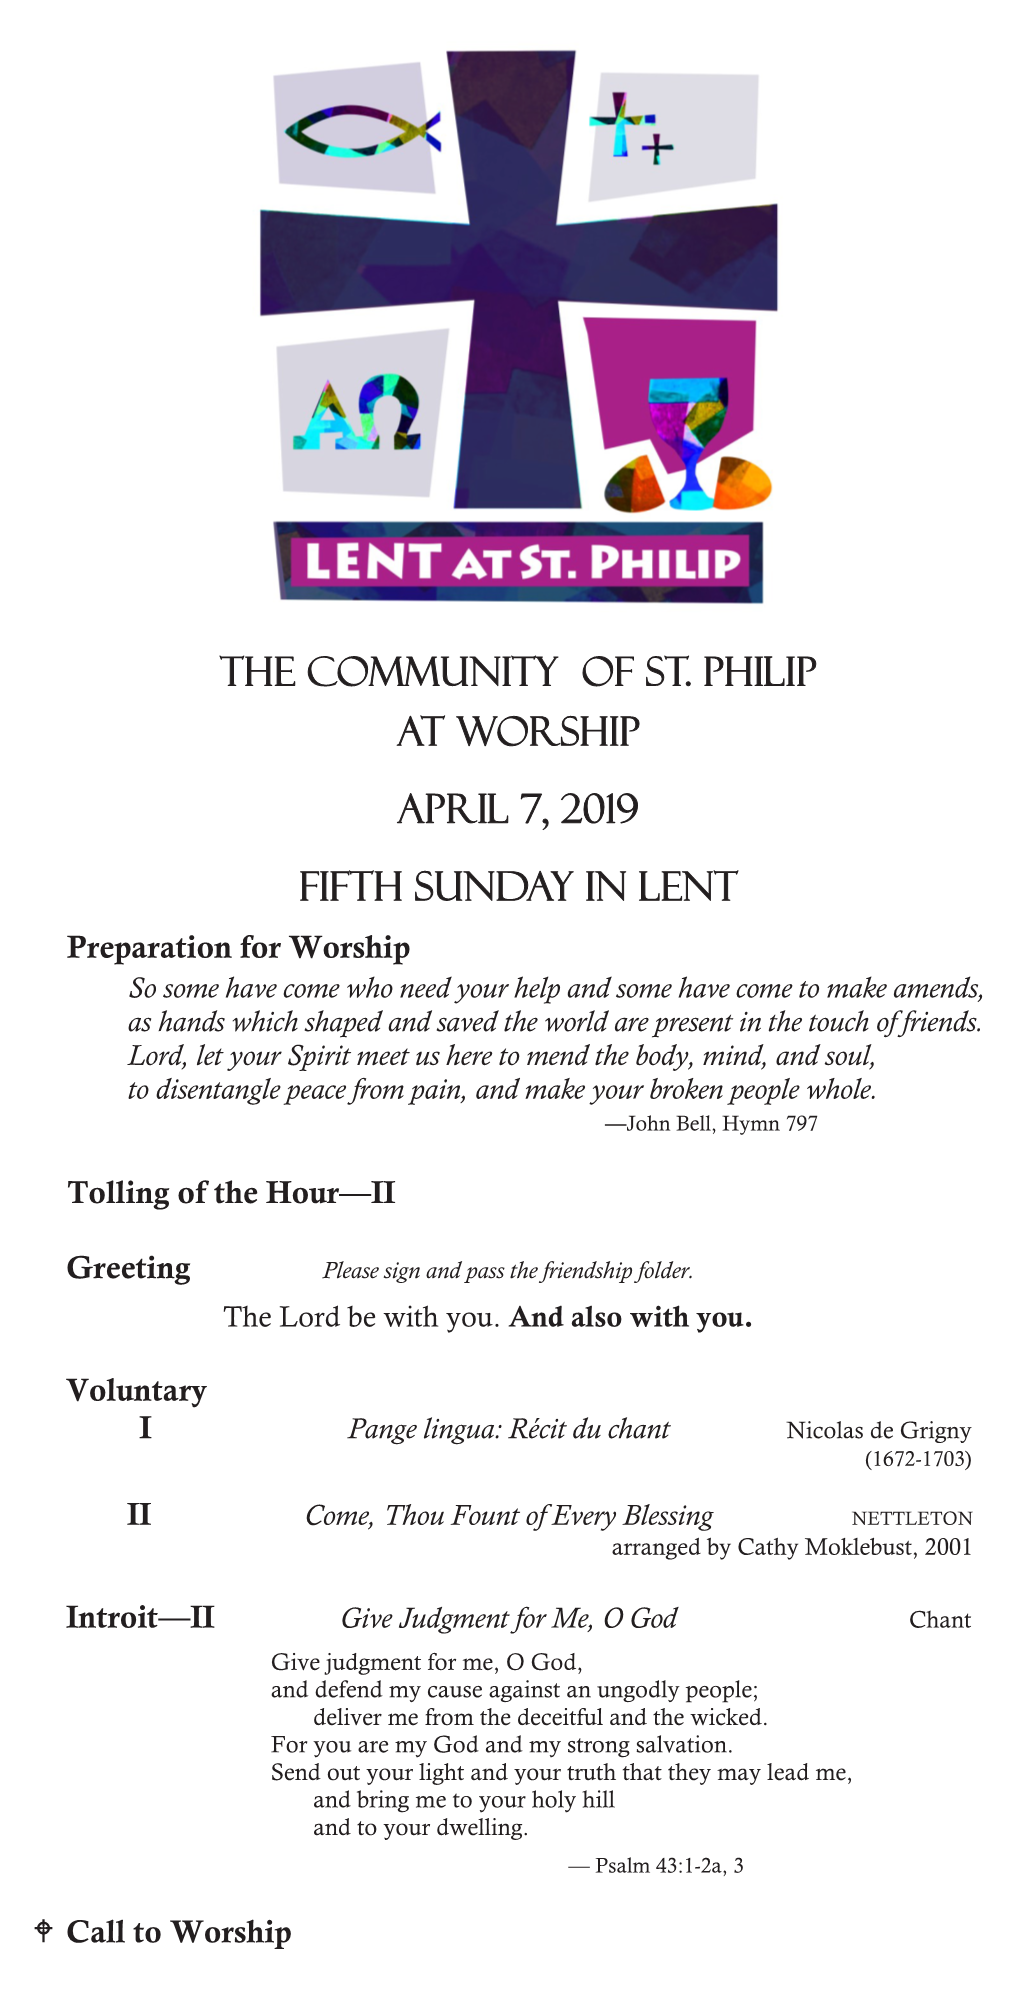 The Community of St. Philip at Worship April 7, 2019 Fifth Sunday